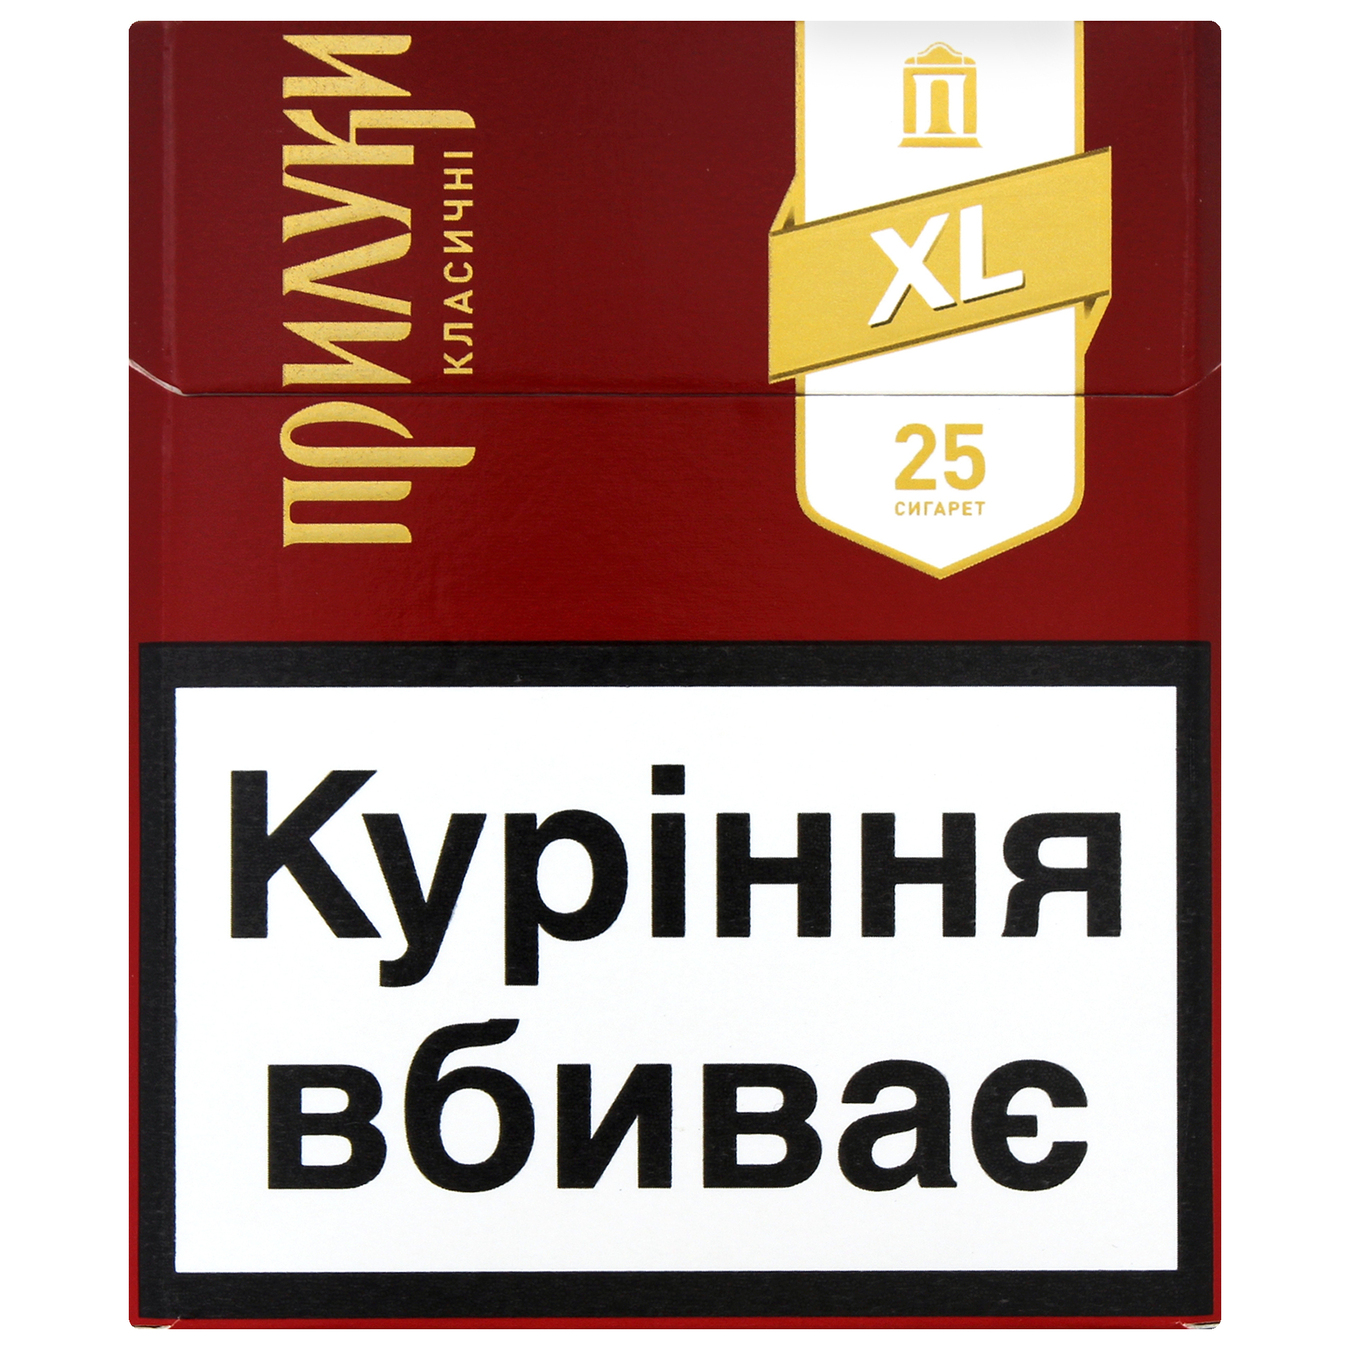 Plyuky Cigarettes Classic XL 25 pcs (the price is indicated without excise tax)